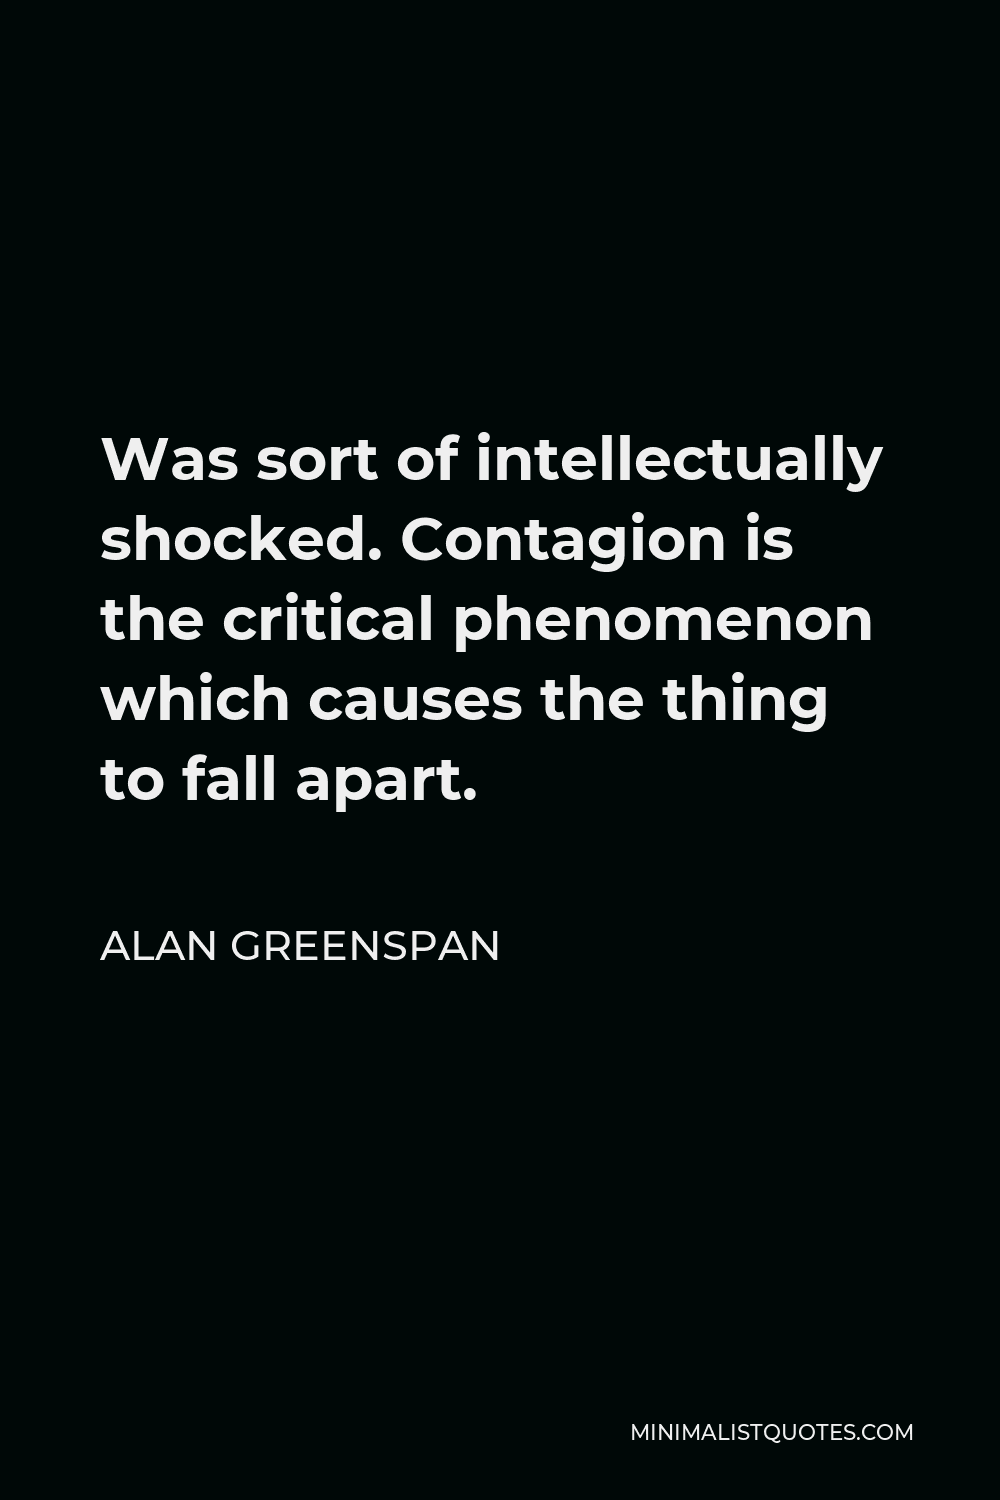 Alan Greenspan Quote - Was sort of intellectually shocked. Contagion is the critical phenomenon which causes the thing to fall apart.